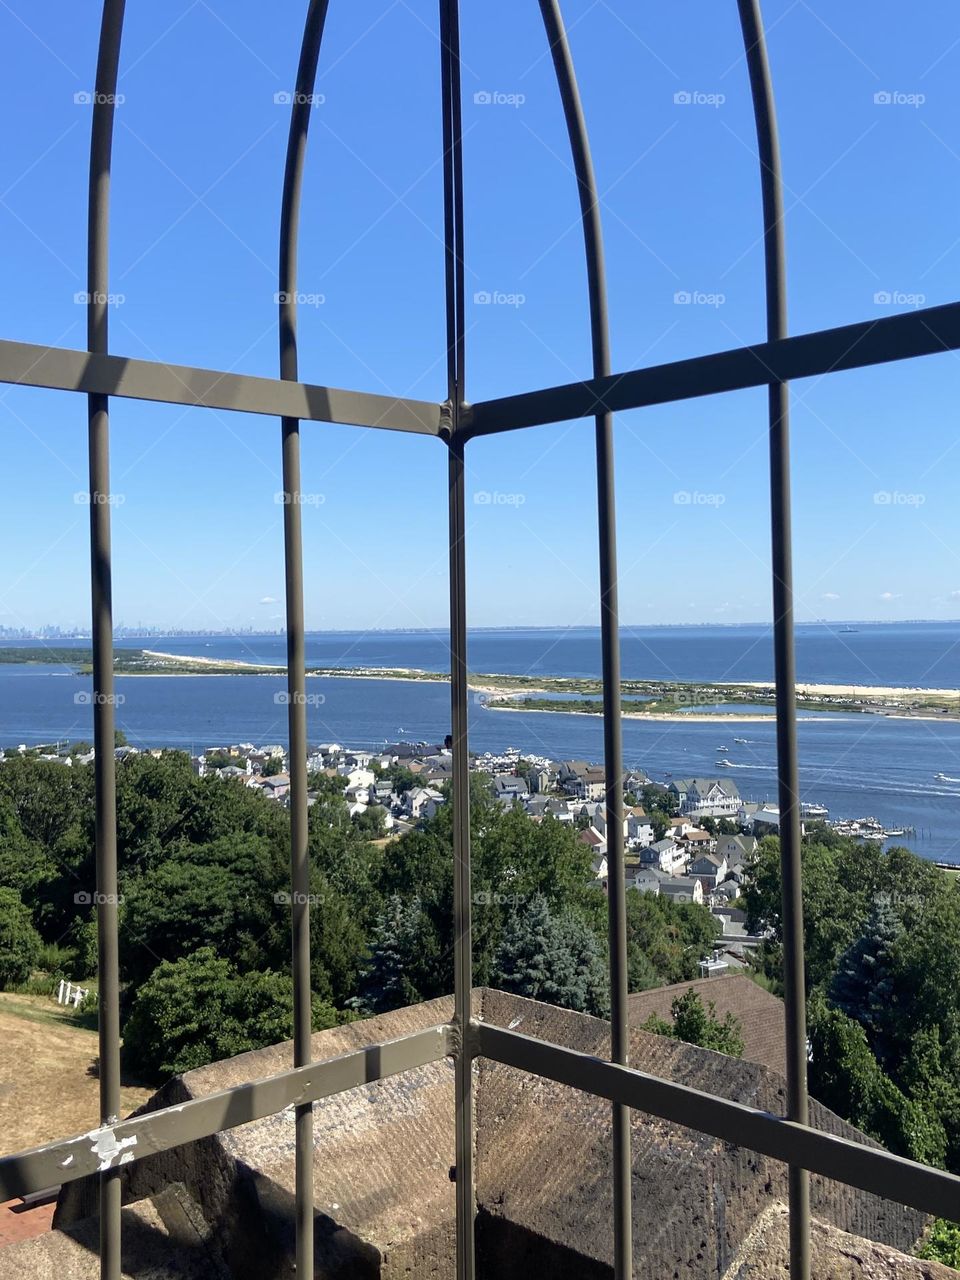 A view of the water from the “almost top” of one of two lighthouses at the Twin Lights Historic Site in Atlantic Highlands, NJ. The site overlooks the Shrewsbury River, Sandy Hook, Raritan Bay, the Atlantic Ocean, and the New York City skyline. 